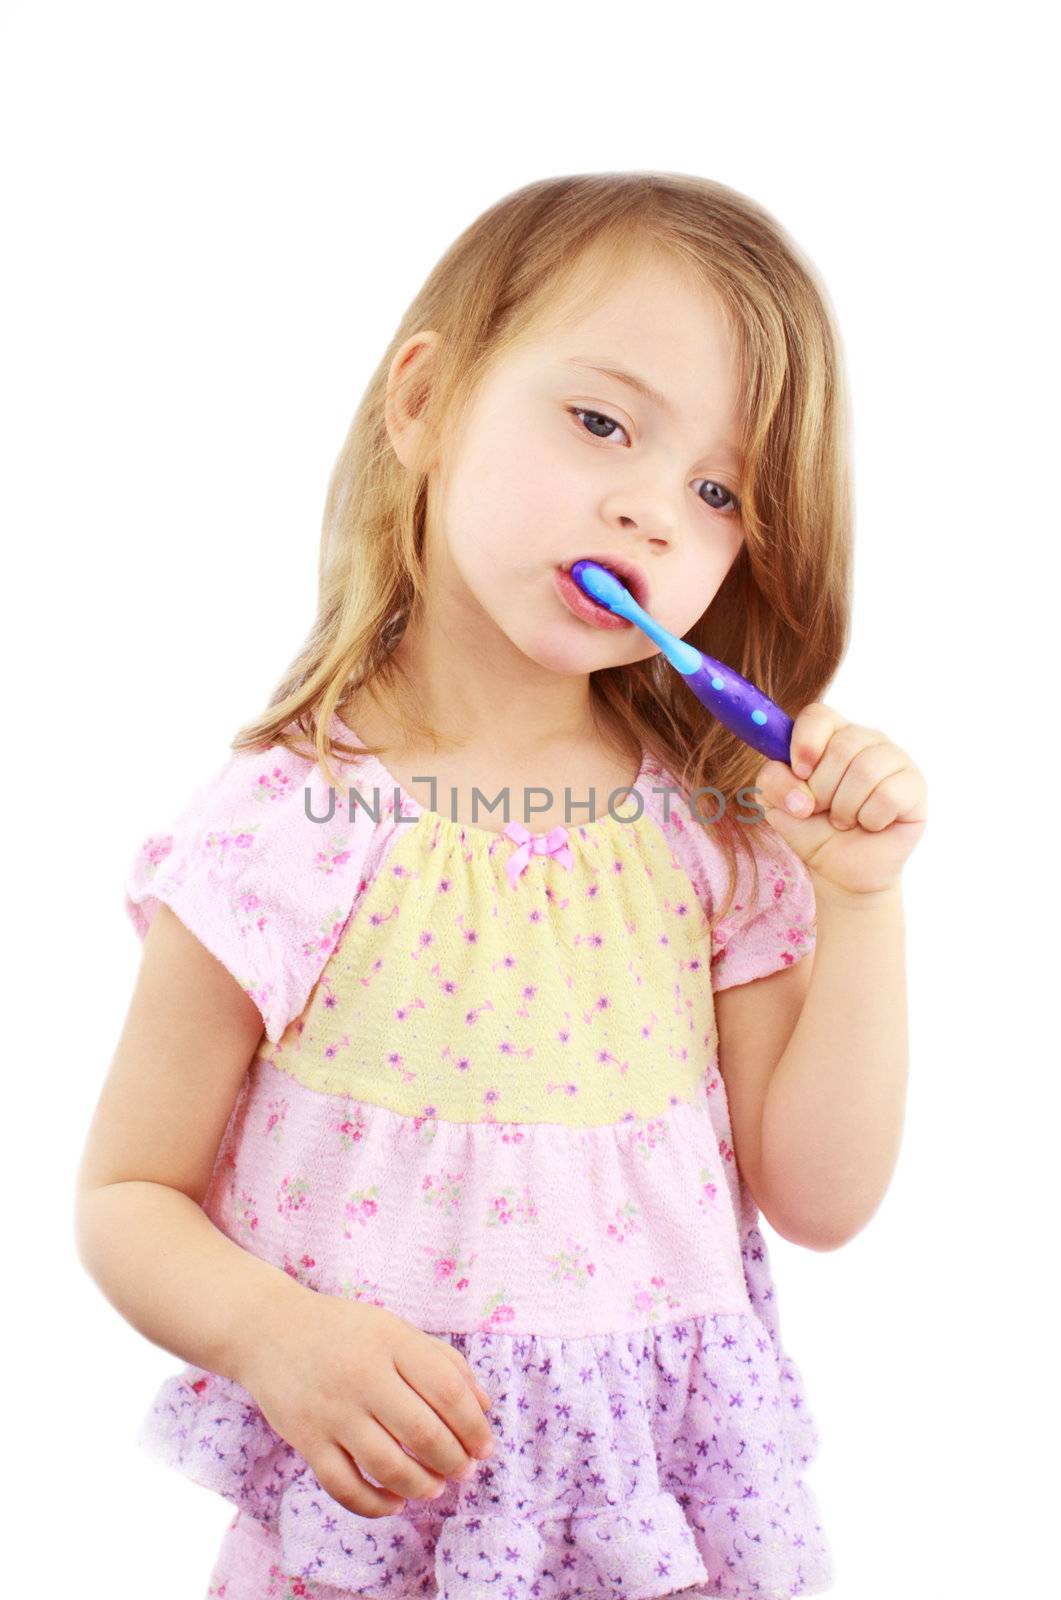 Cute little girl in pink pajamas is brushing her teeth against a white background.
